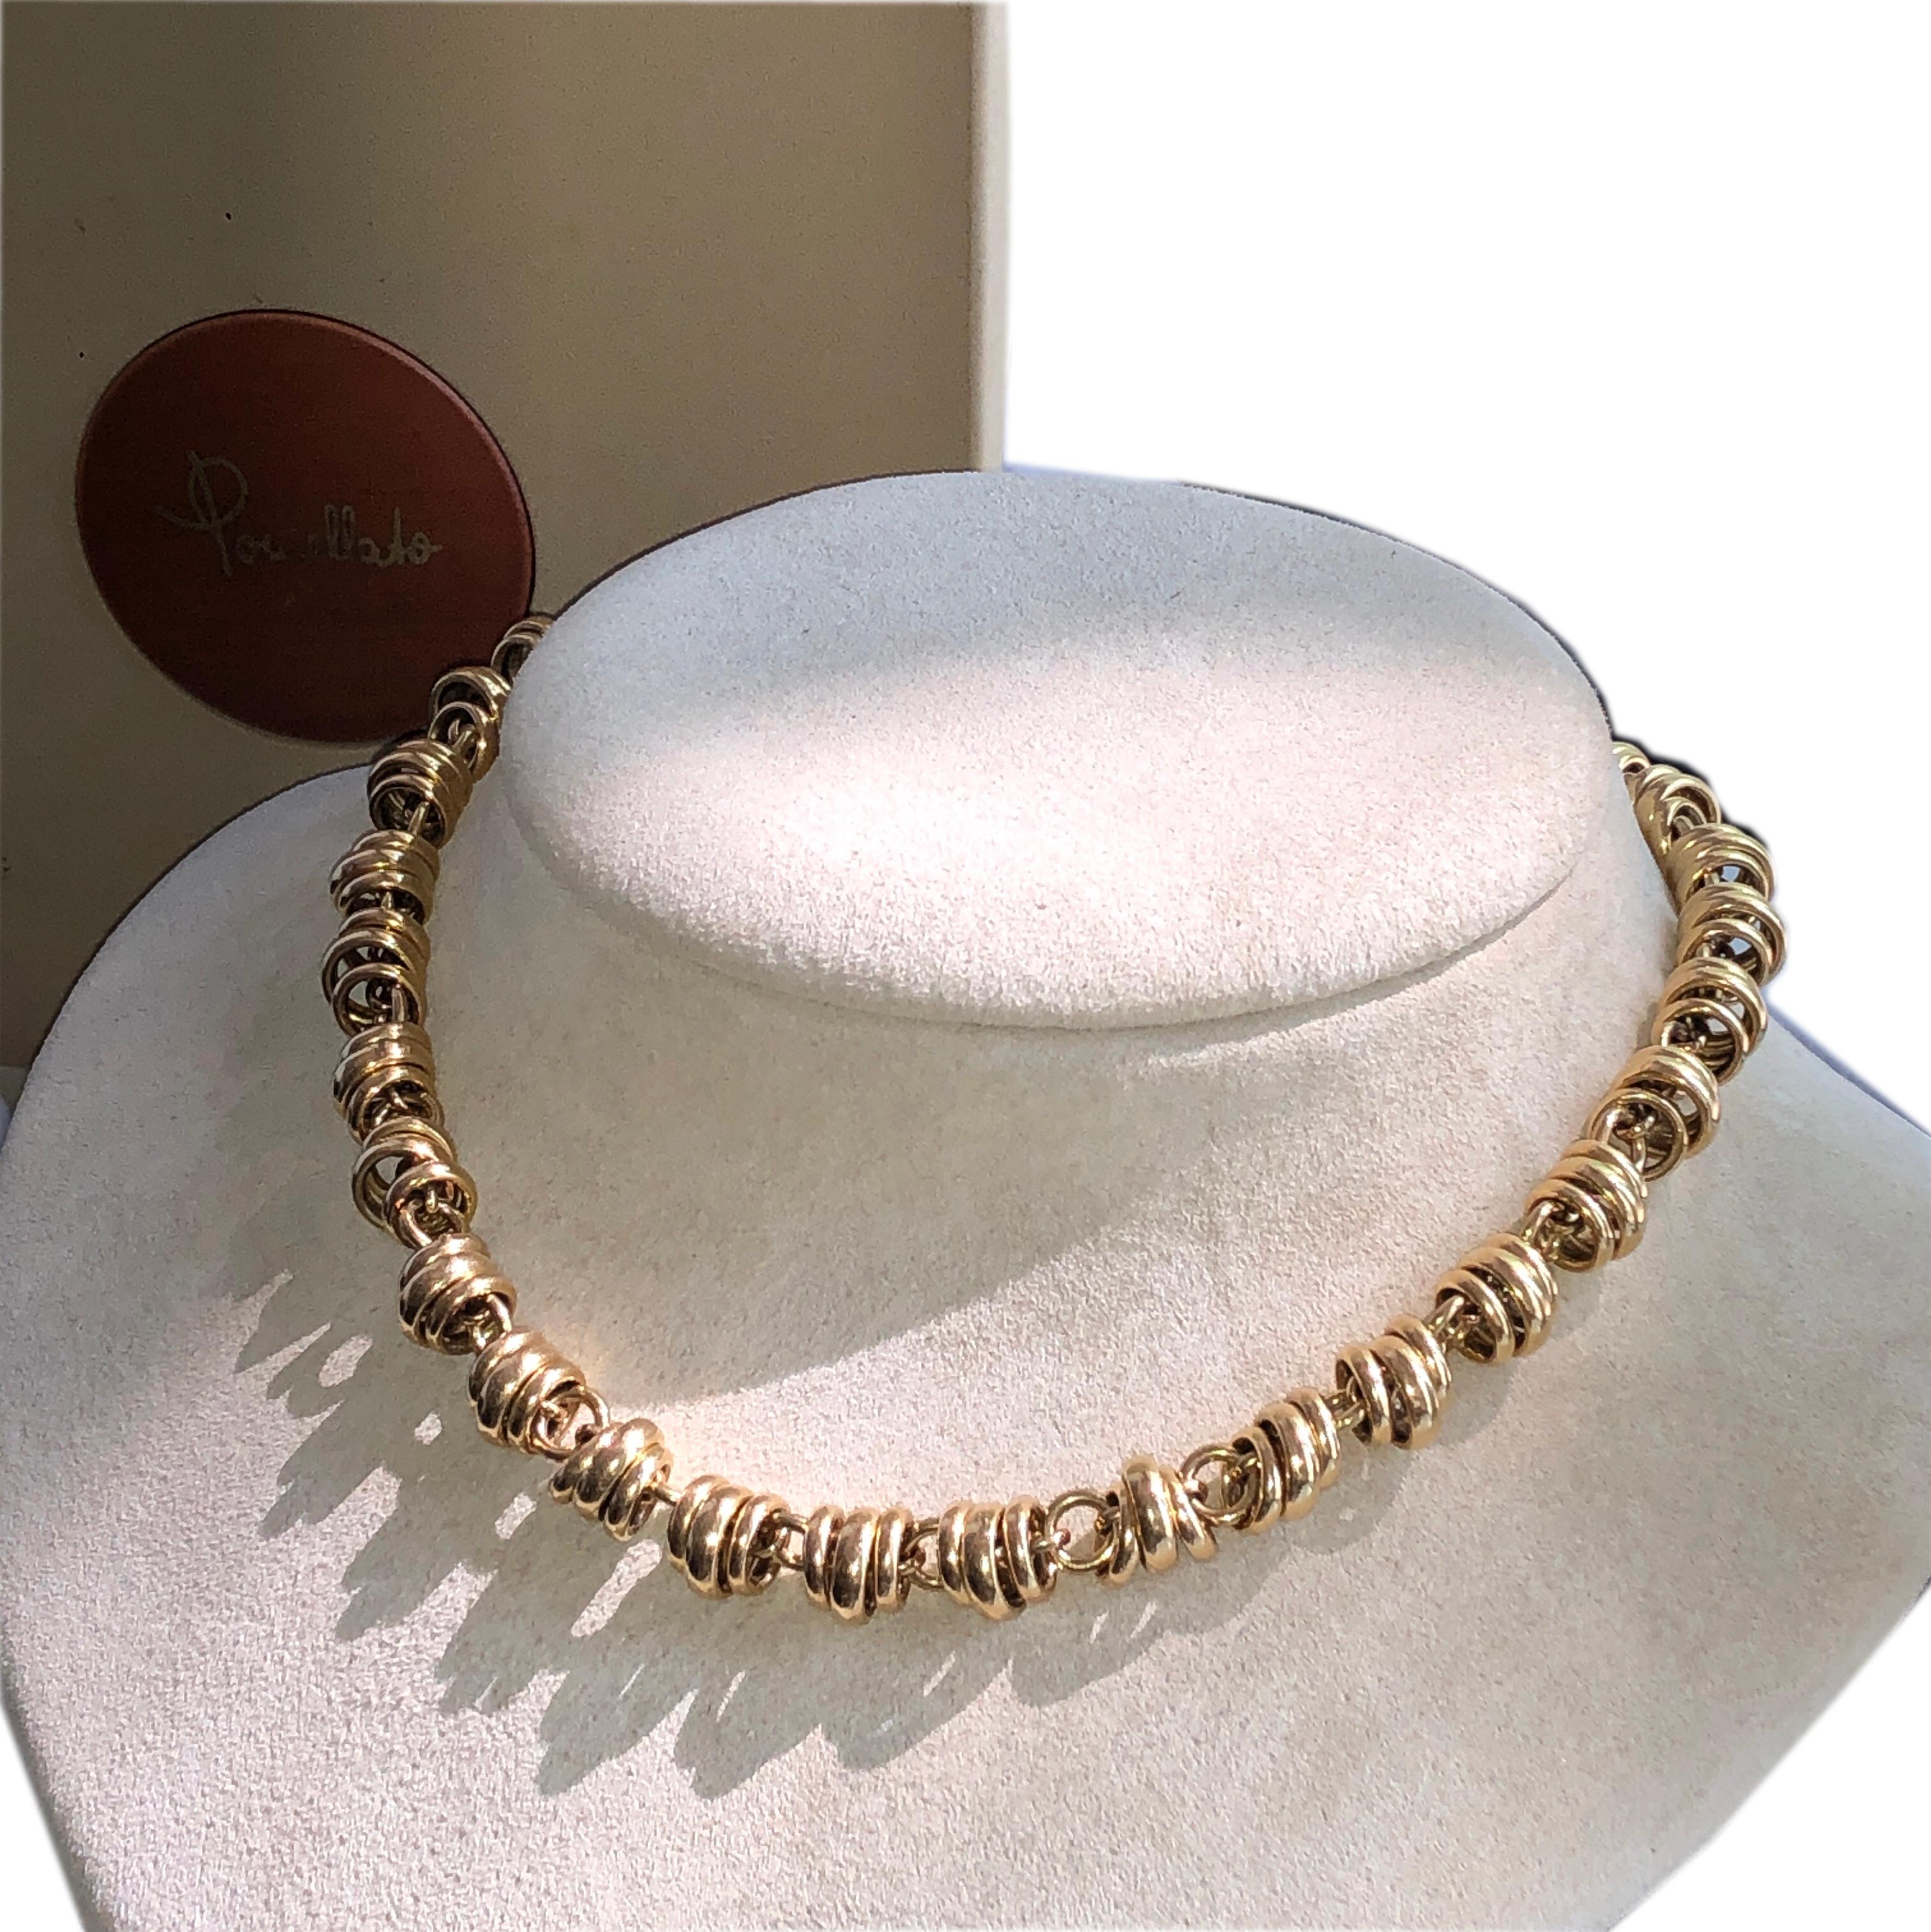 1988 Iconic Pomellato 18 Karat Solid Yellow Gold Chain Necklace 2